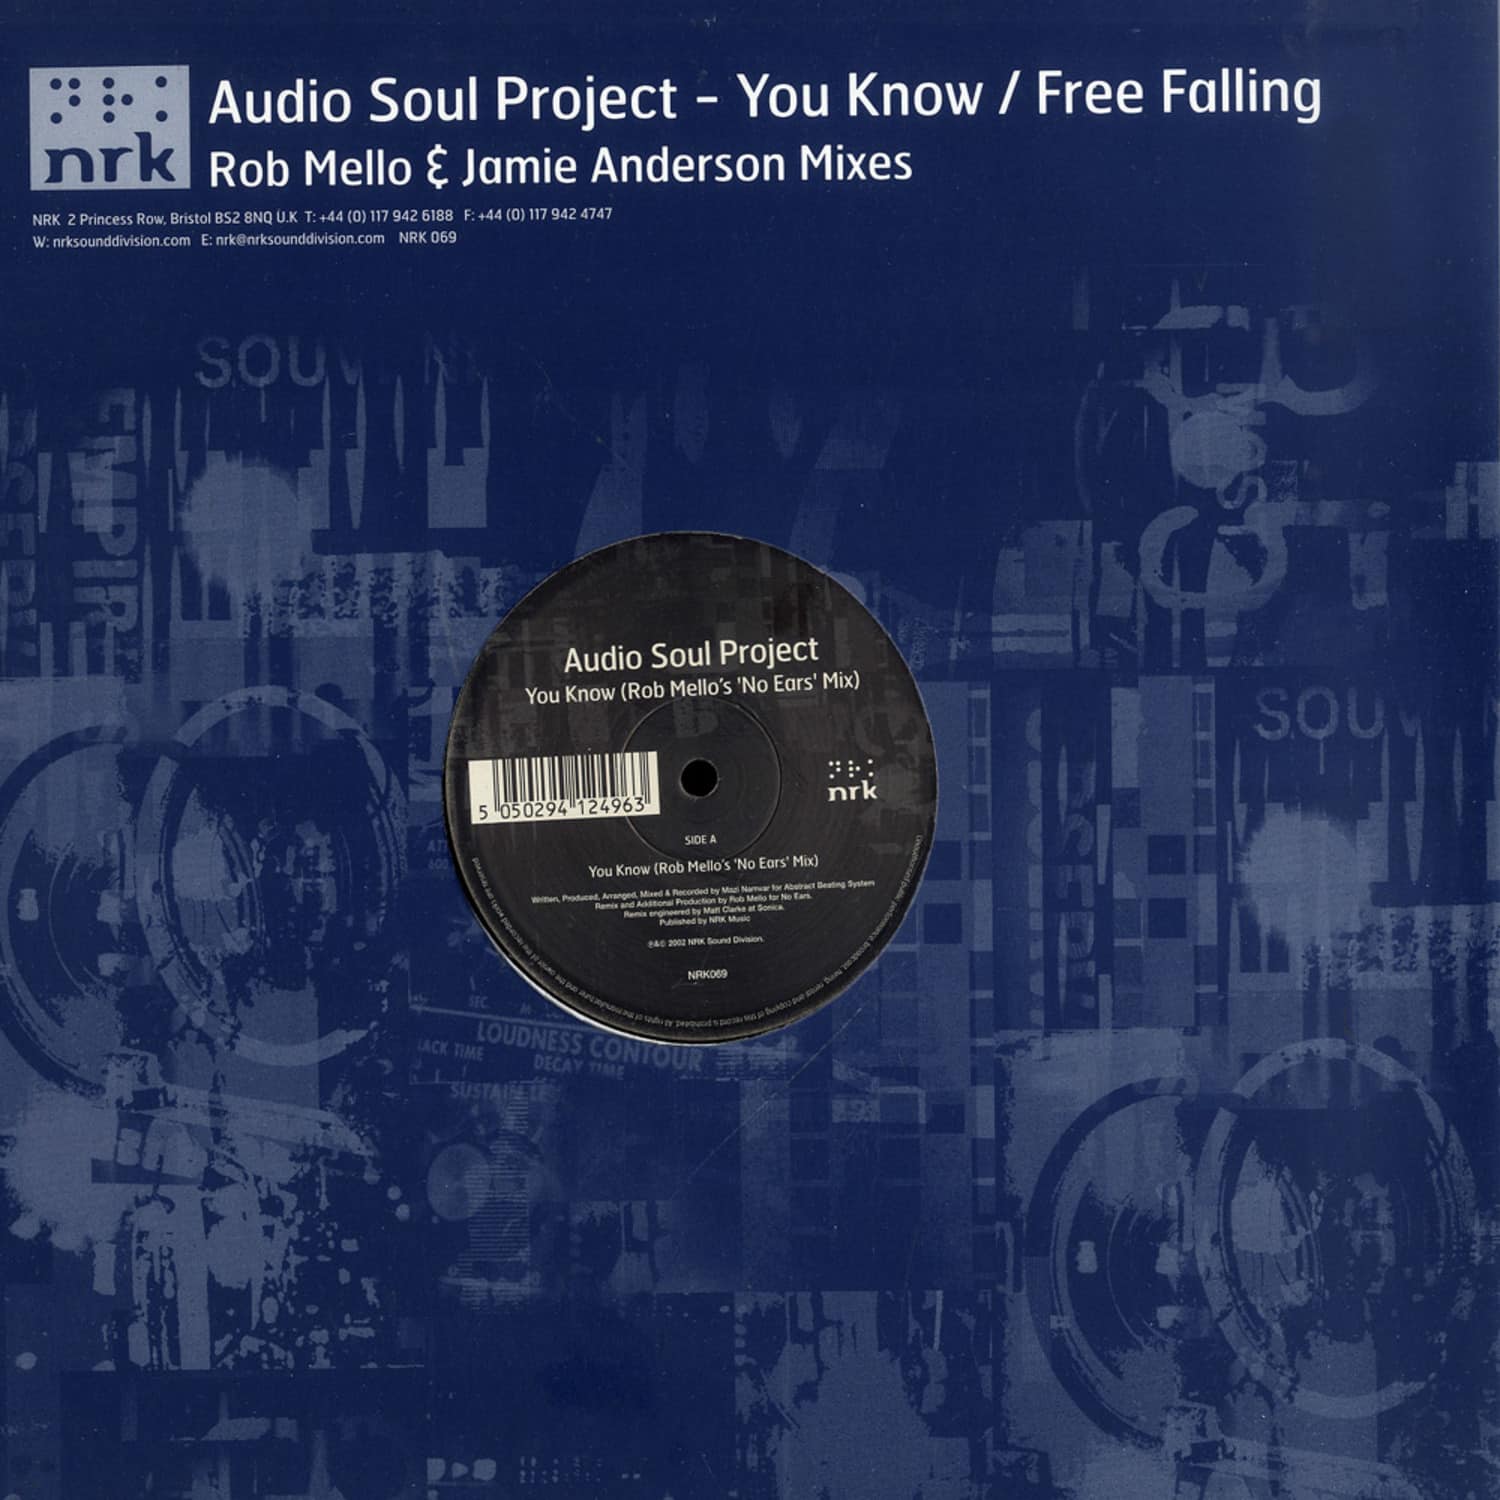 Audio Soul Project - YOU KNOW / FREE FALLING